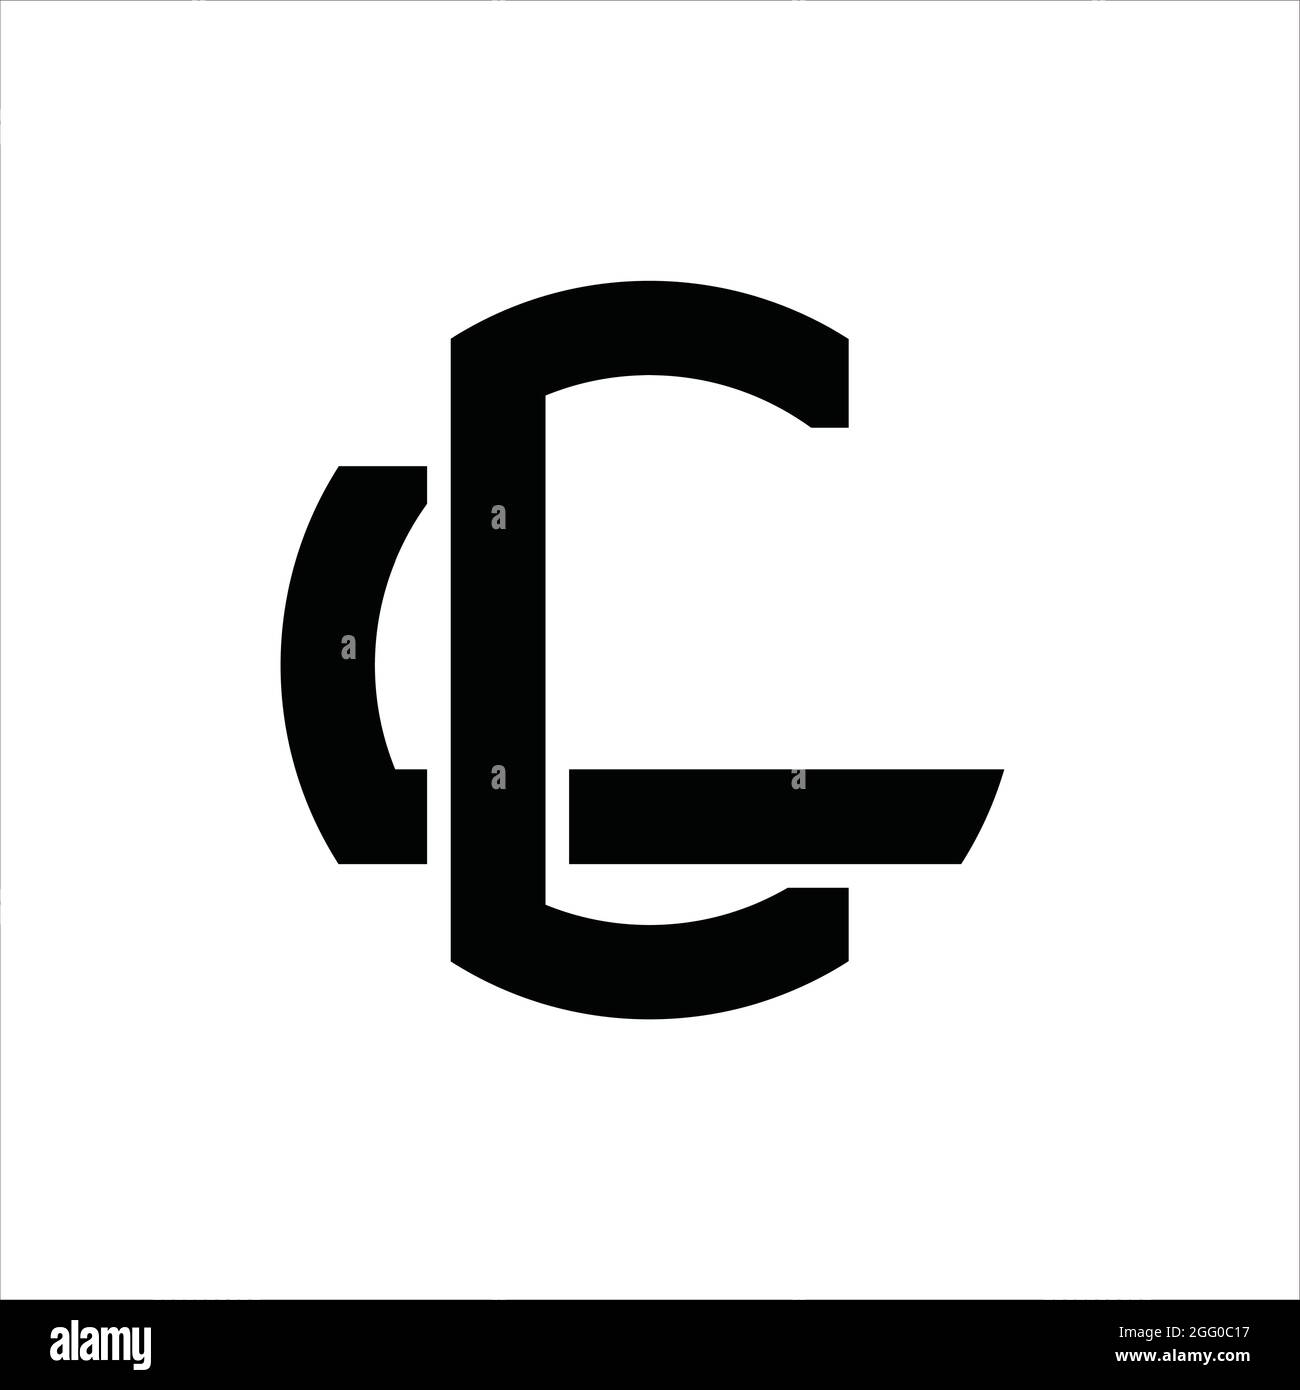 Cl logos Stock Vector Images - Alamy